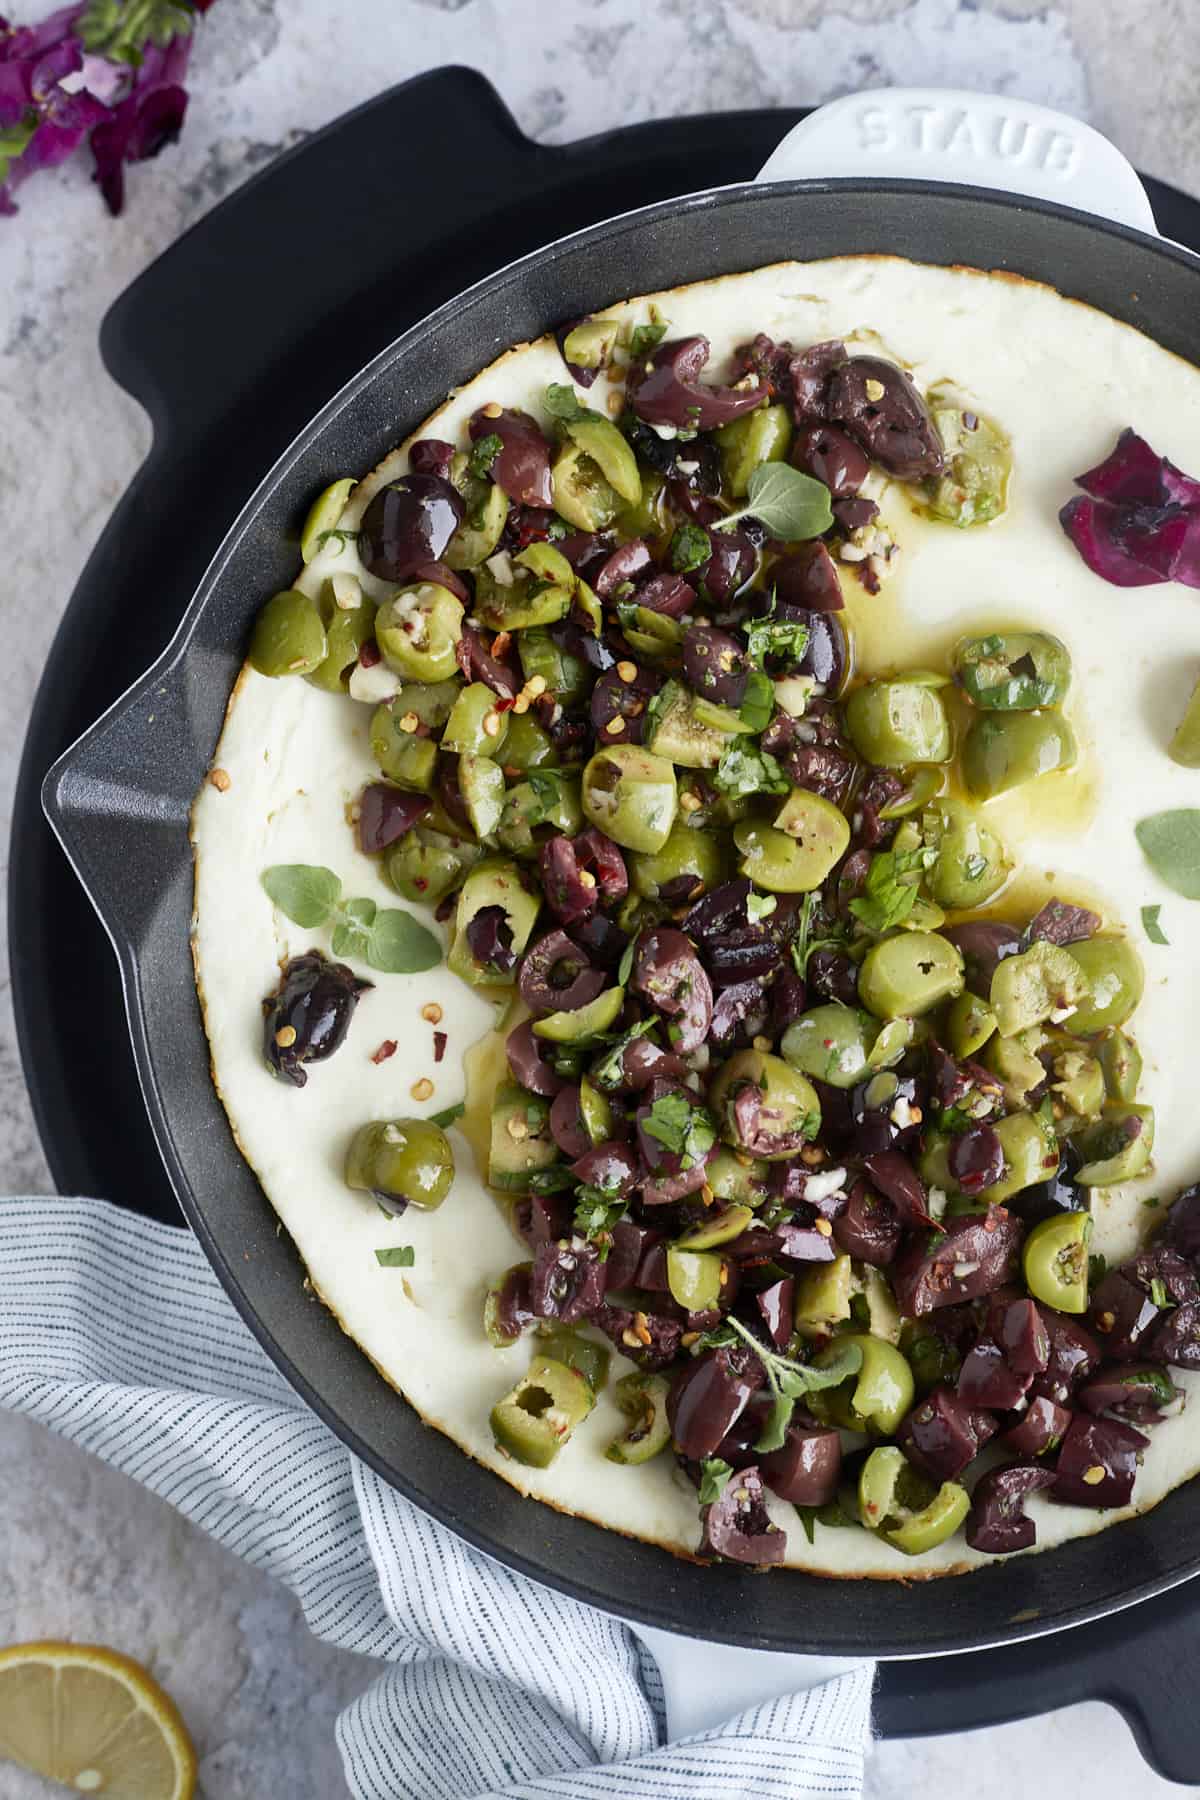 warm feta dip with marinated olives